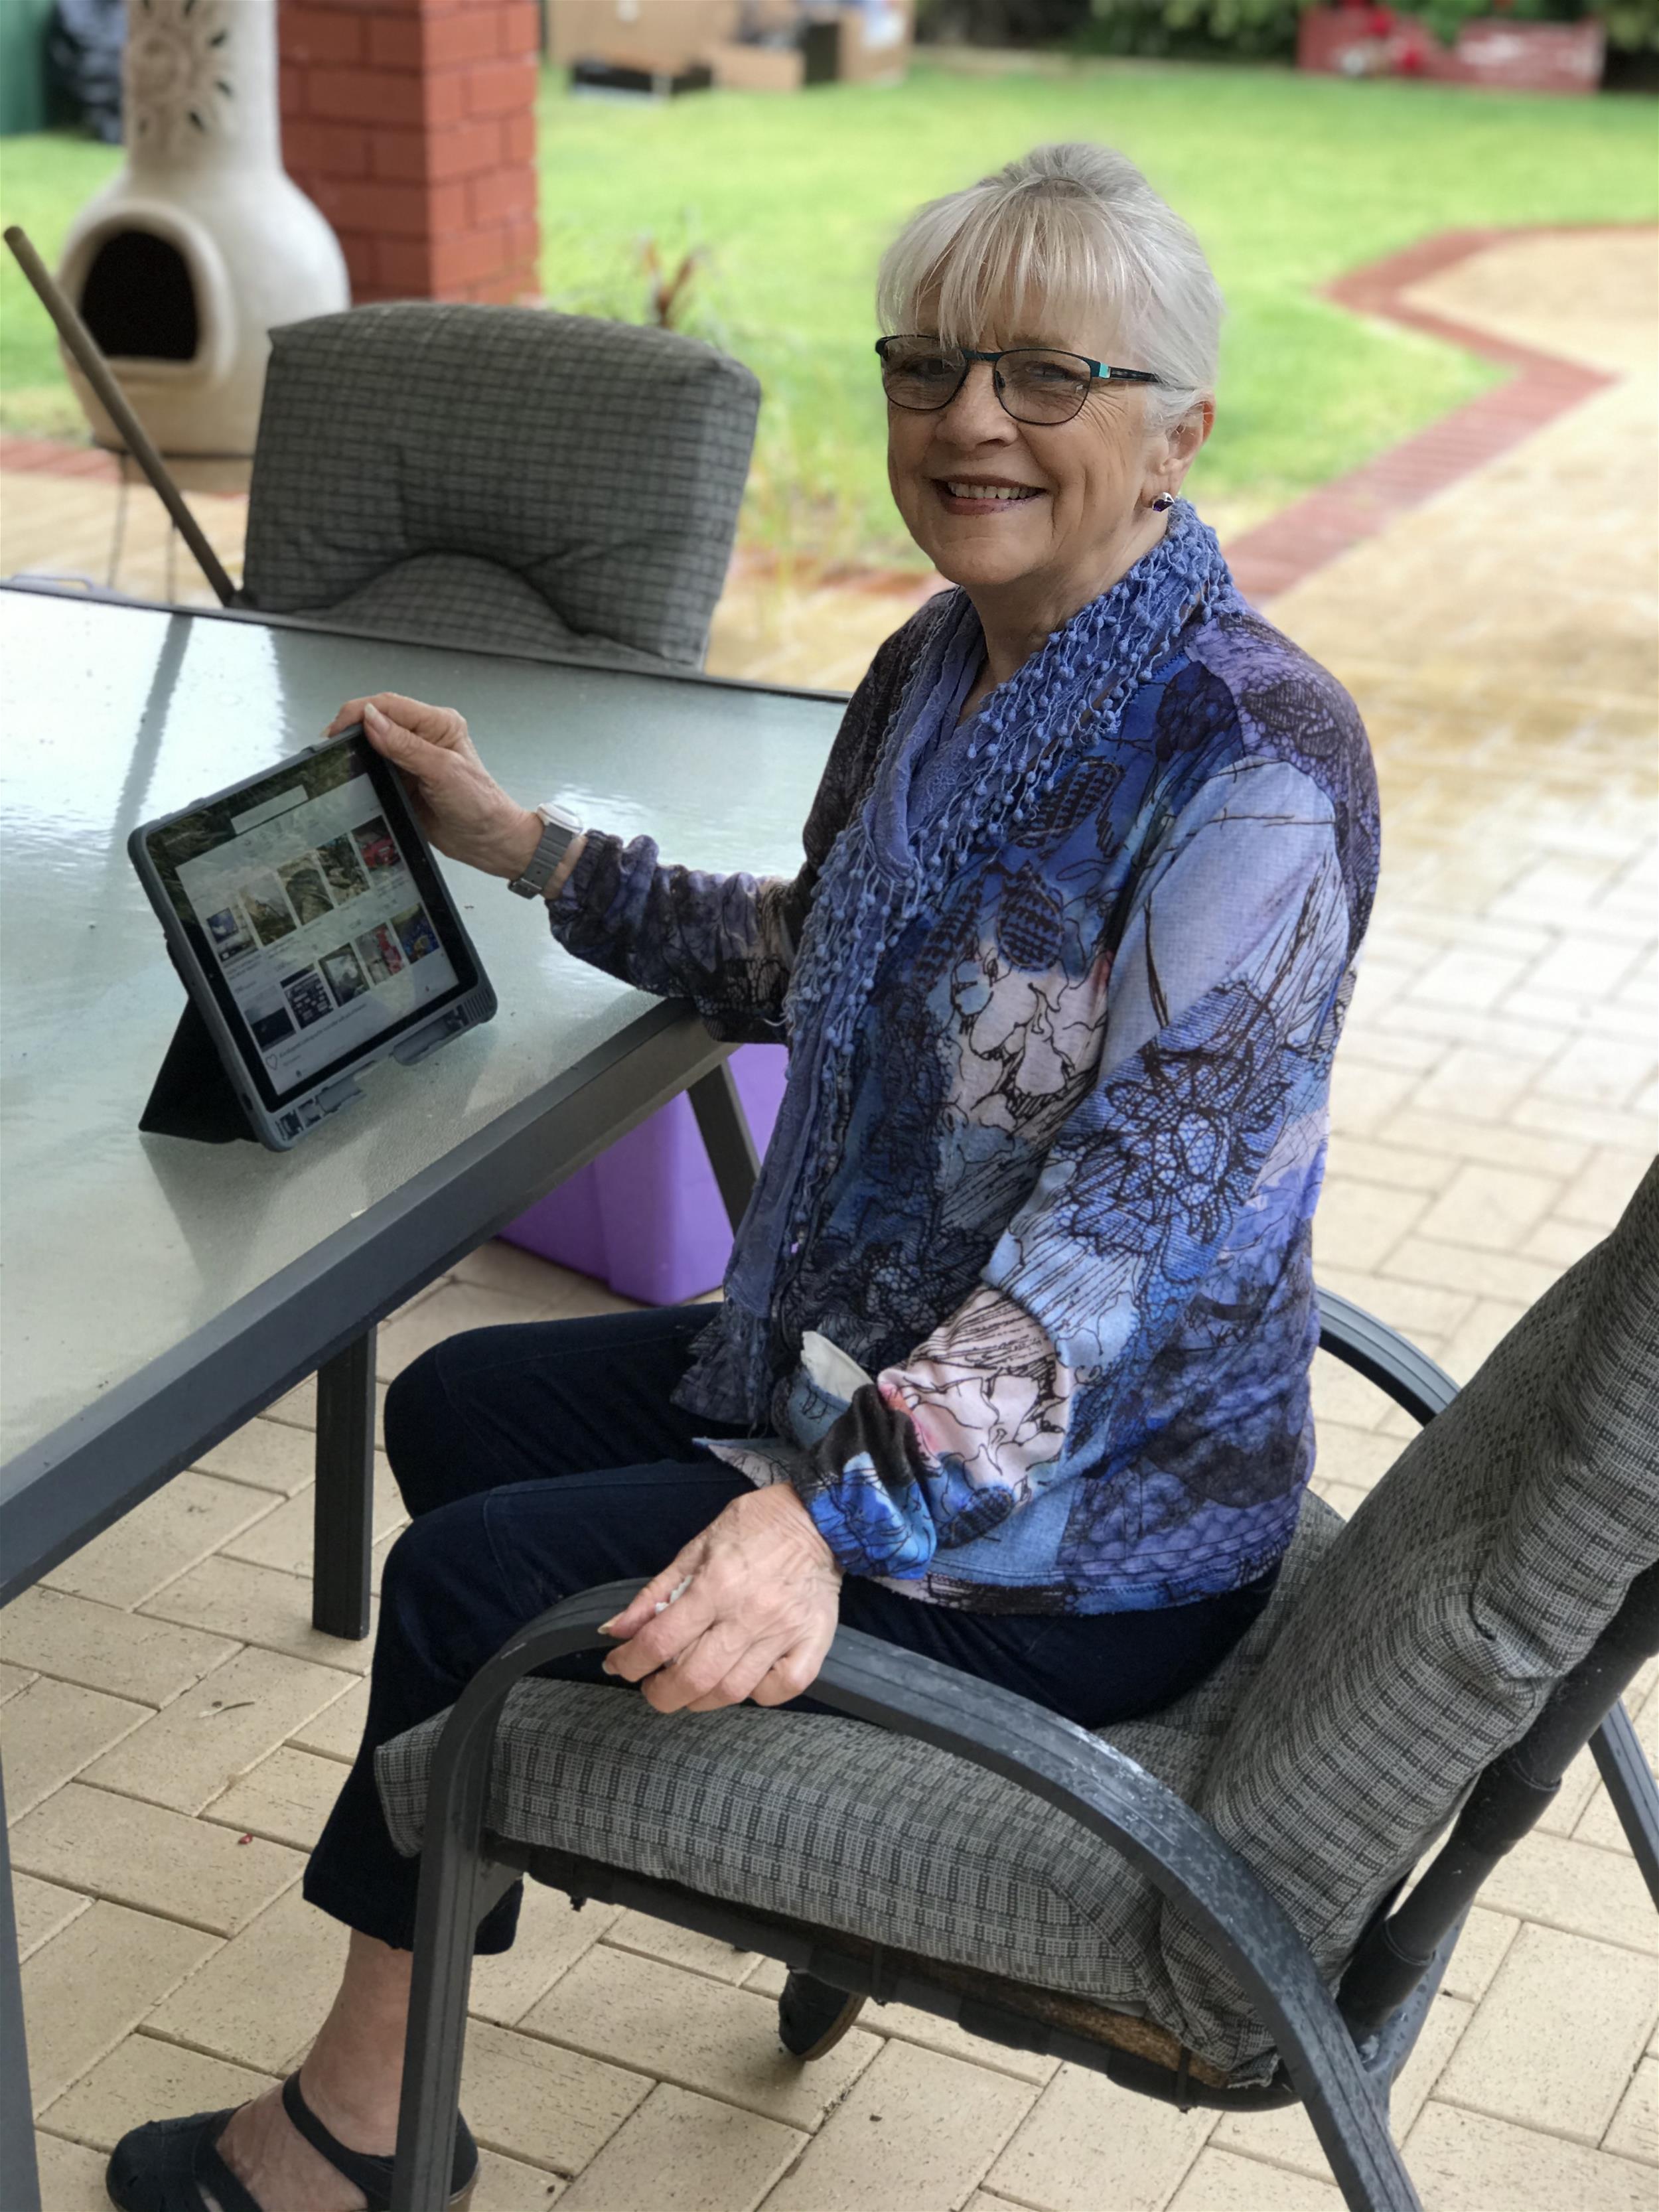 Smartly dressed older lady, with white bun and glasses, smiling. Seated at outdoor table with iPad in front of her.